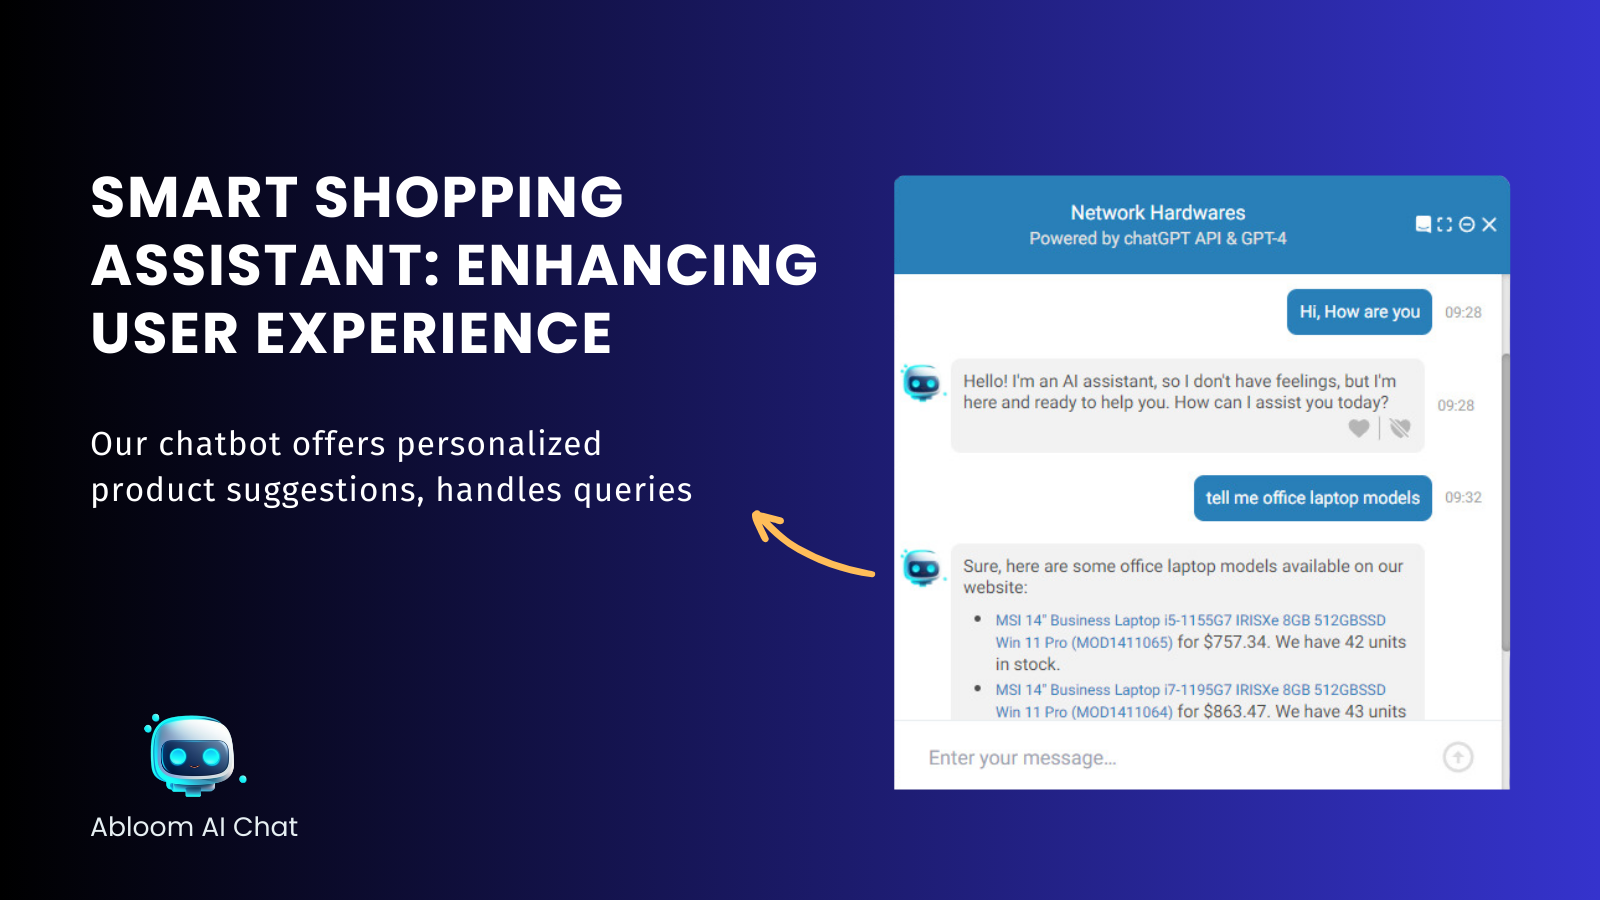 Smart Shopping Assistant: Enhancing User Experience